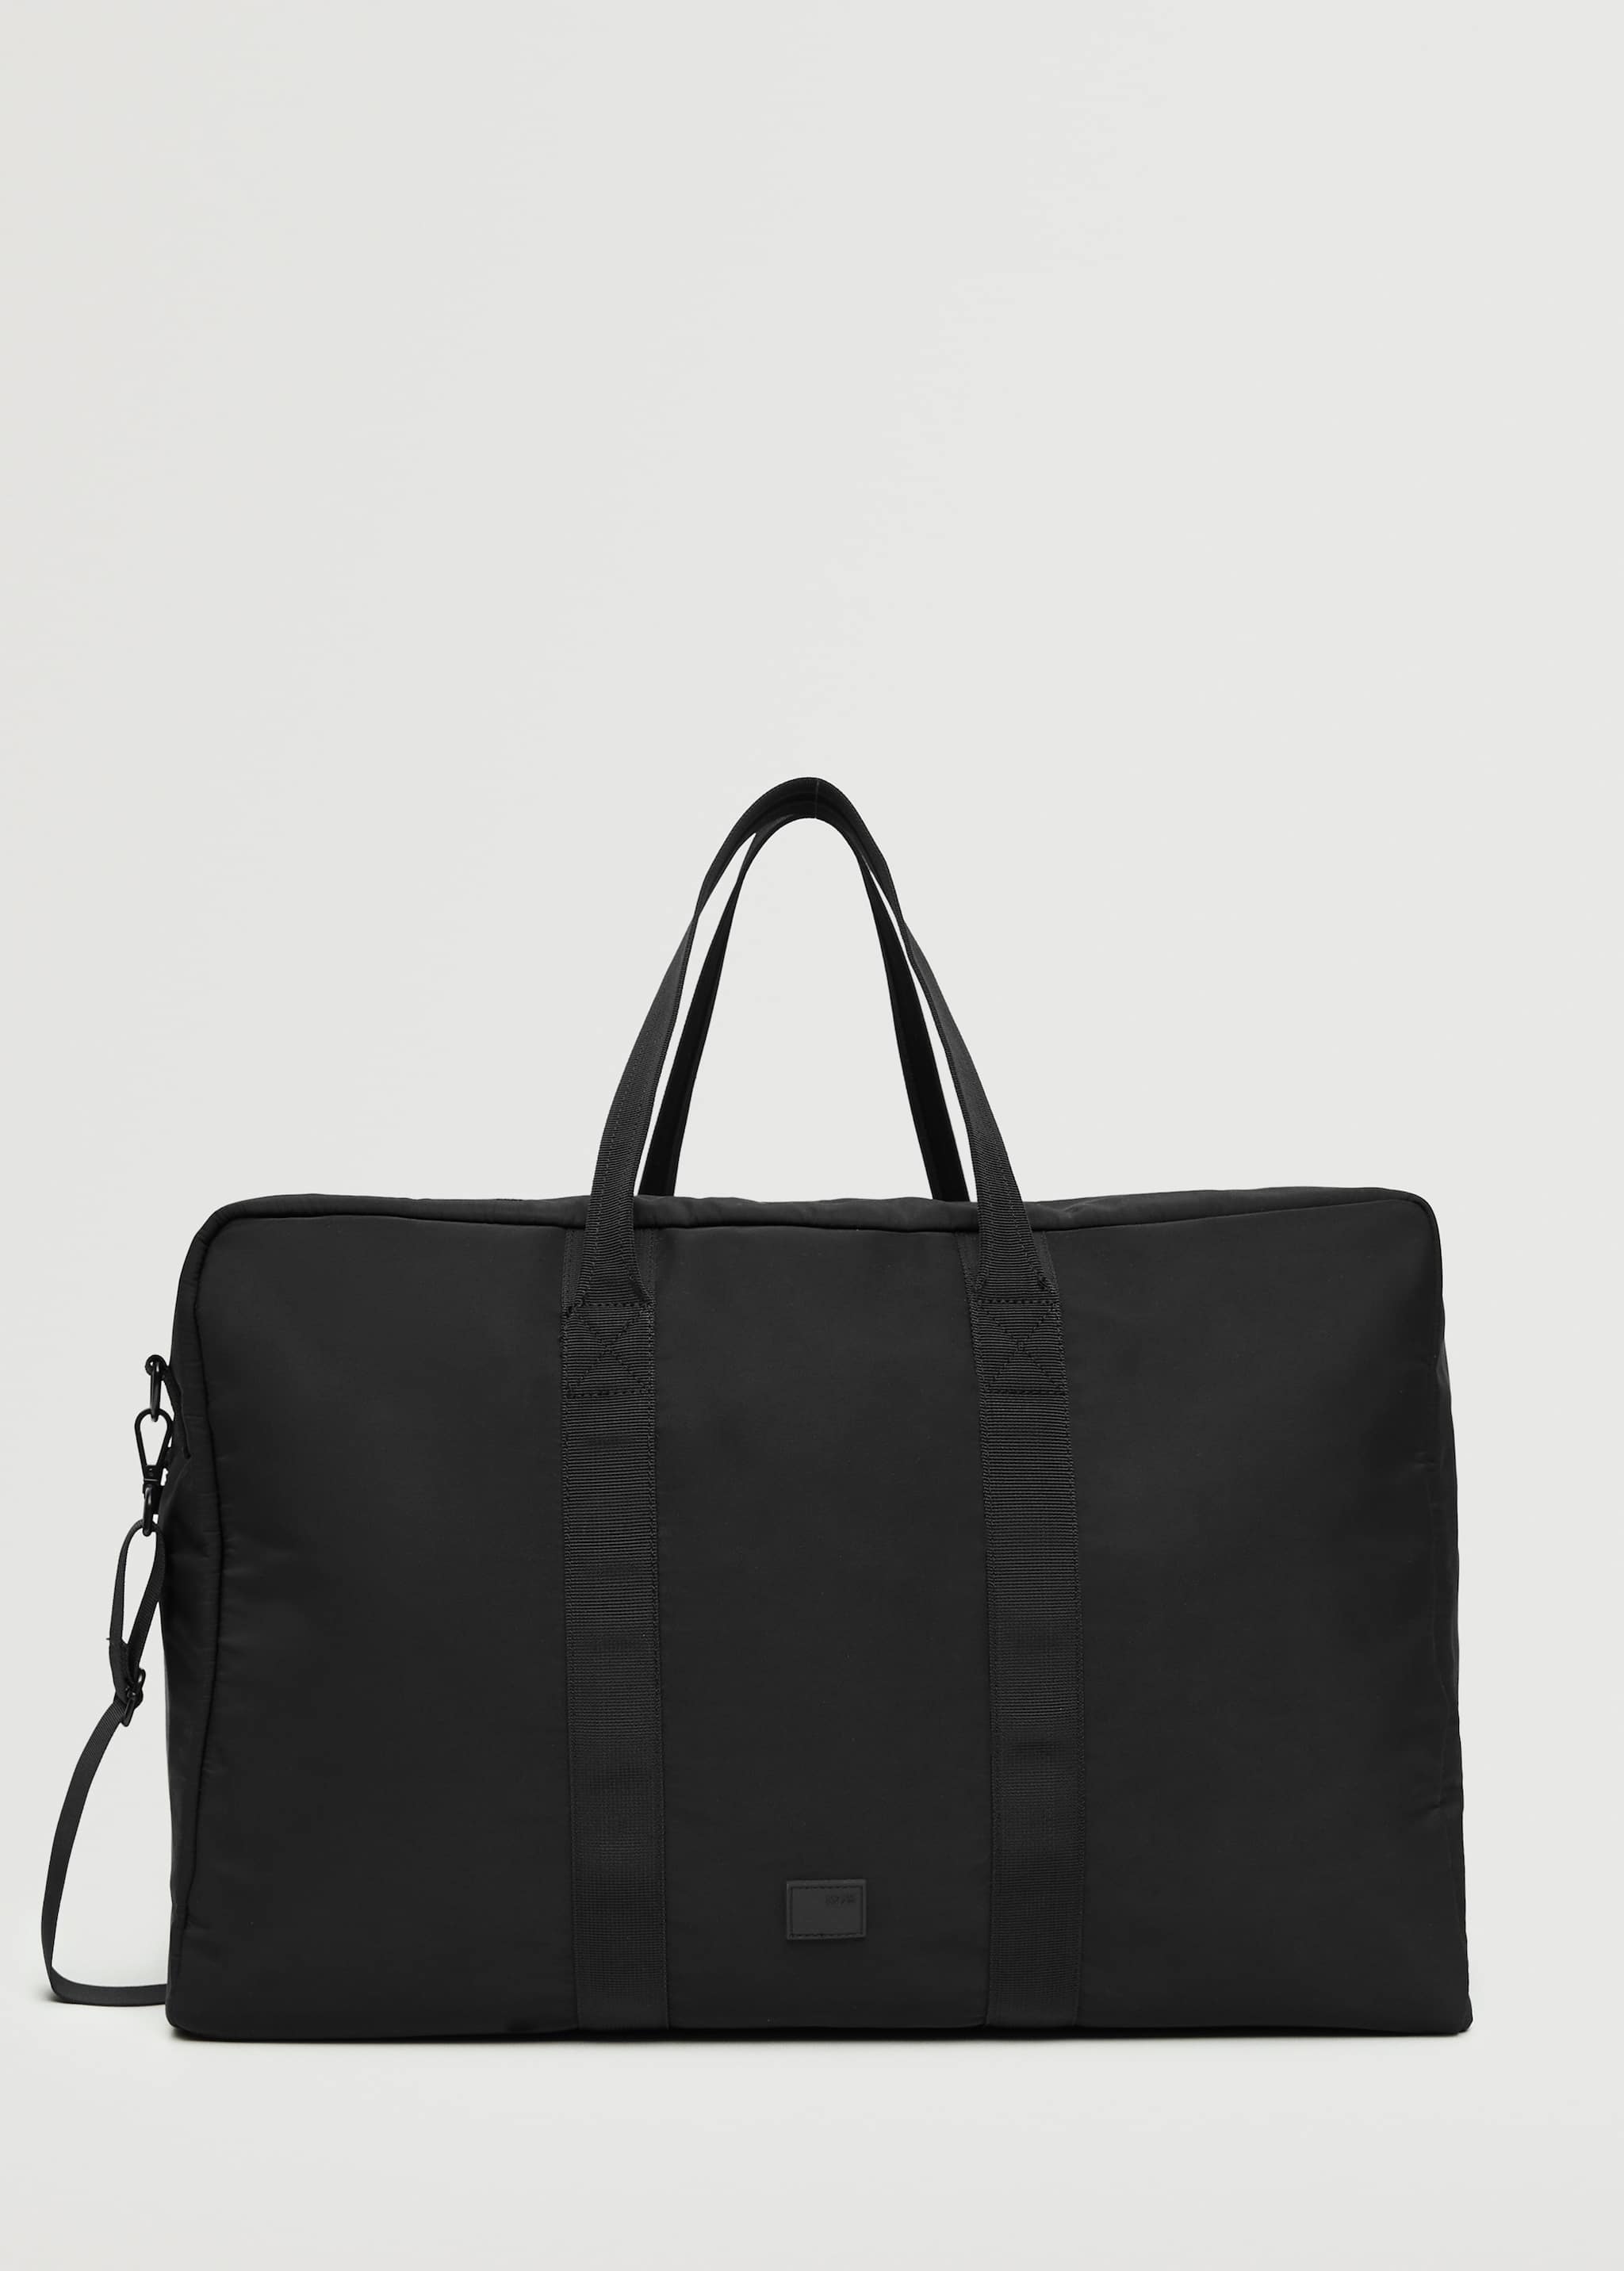 Nylon travel bag - Article without model